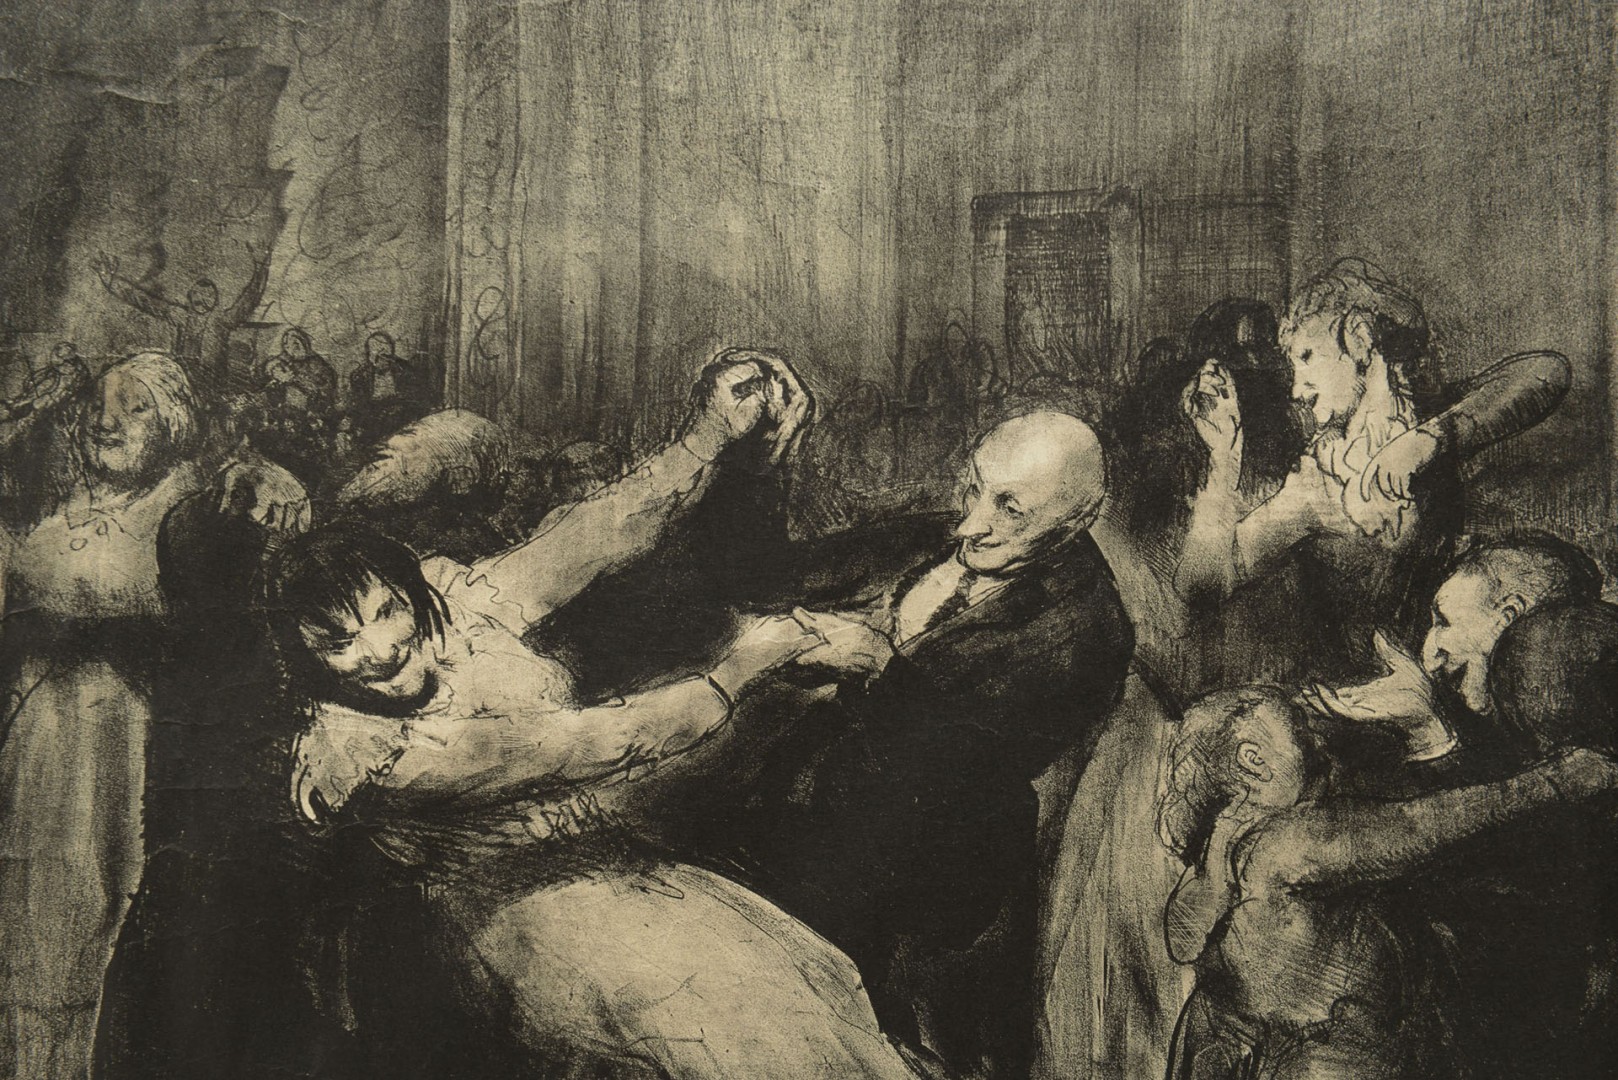 Lot 220: George Bellows "Dance in a Madhouse" signed Litho